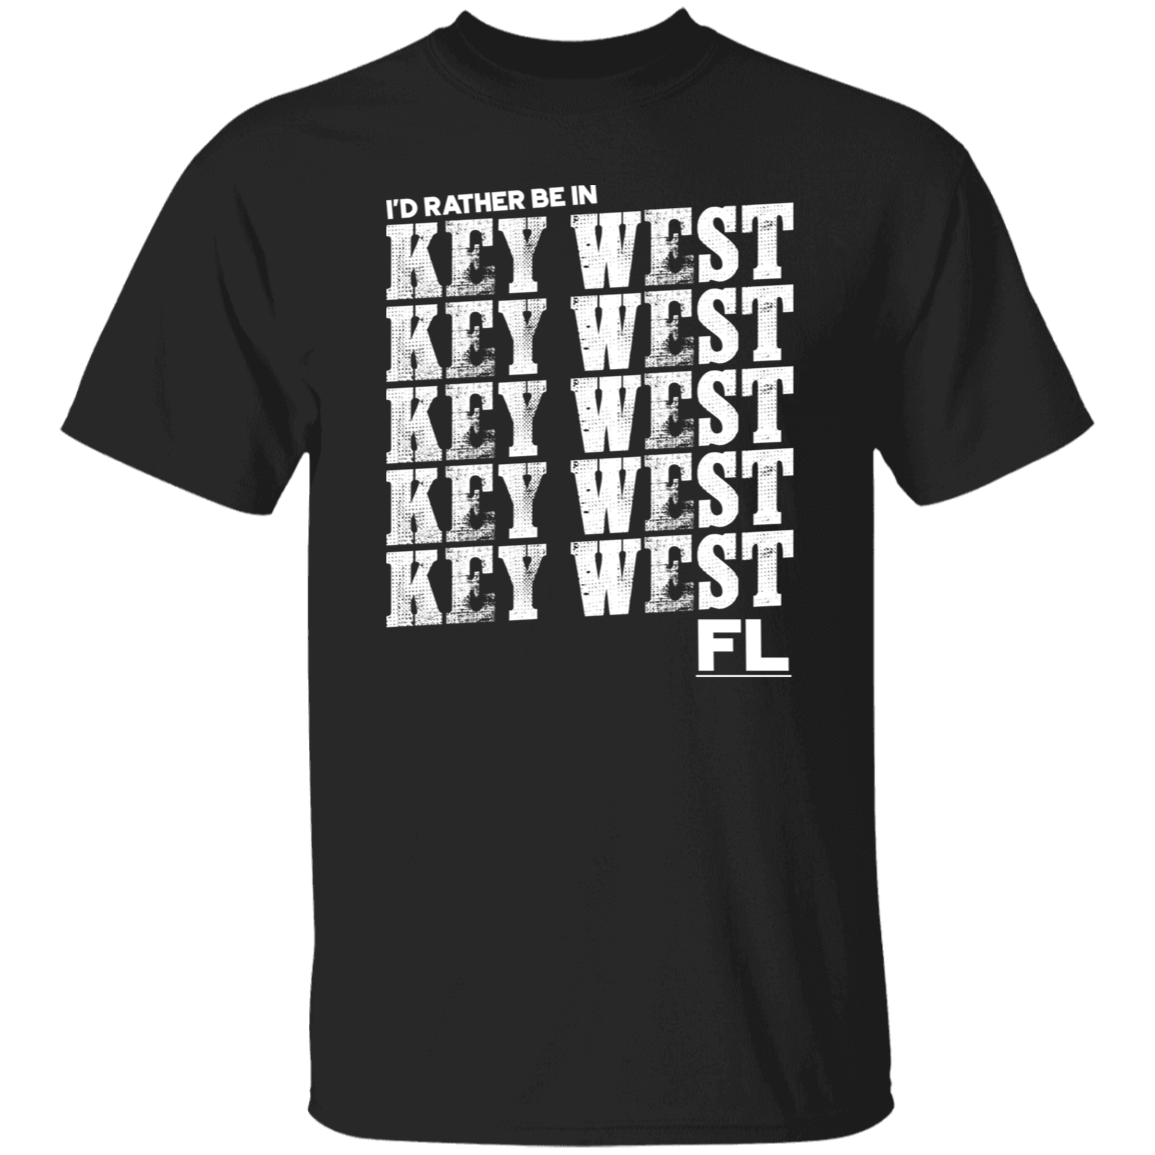 I'd Rather Be In Key West FL White Print T-Shirt